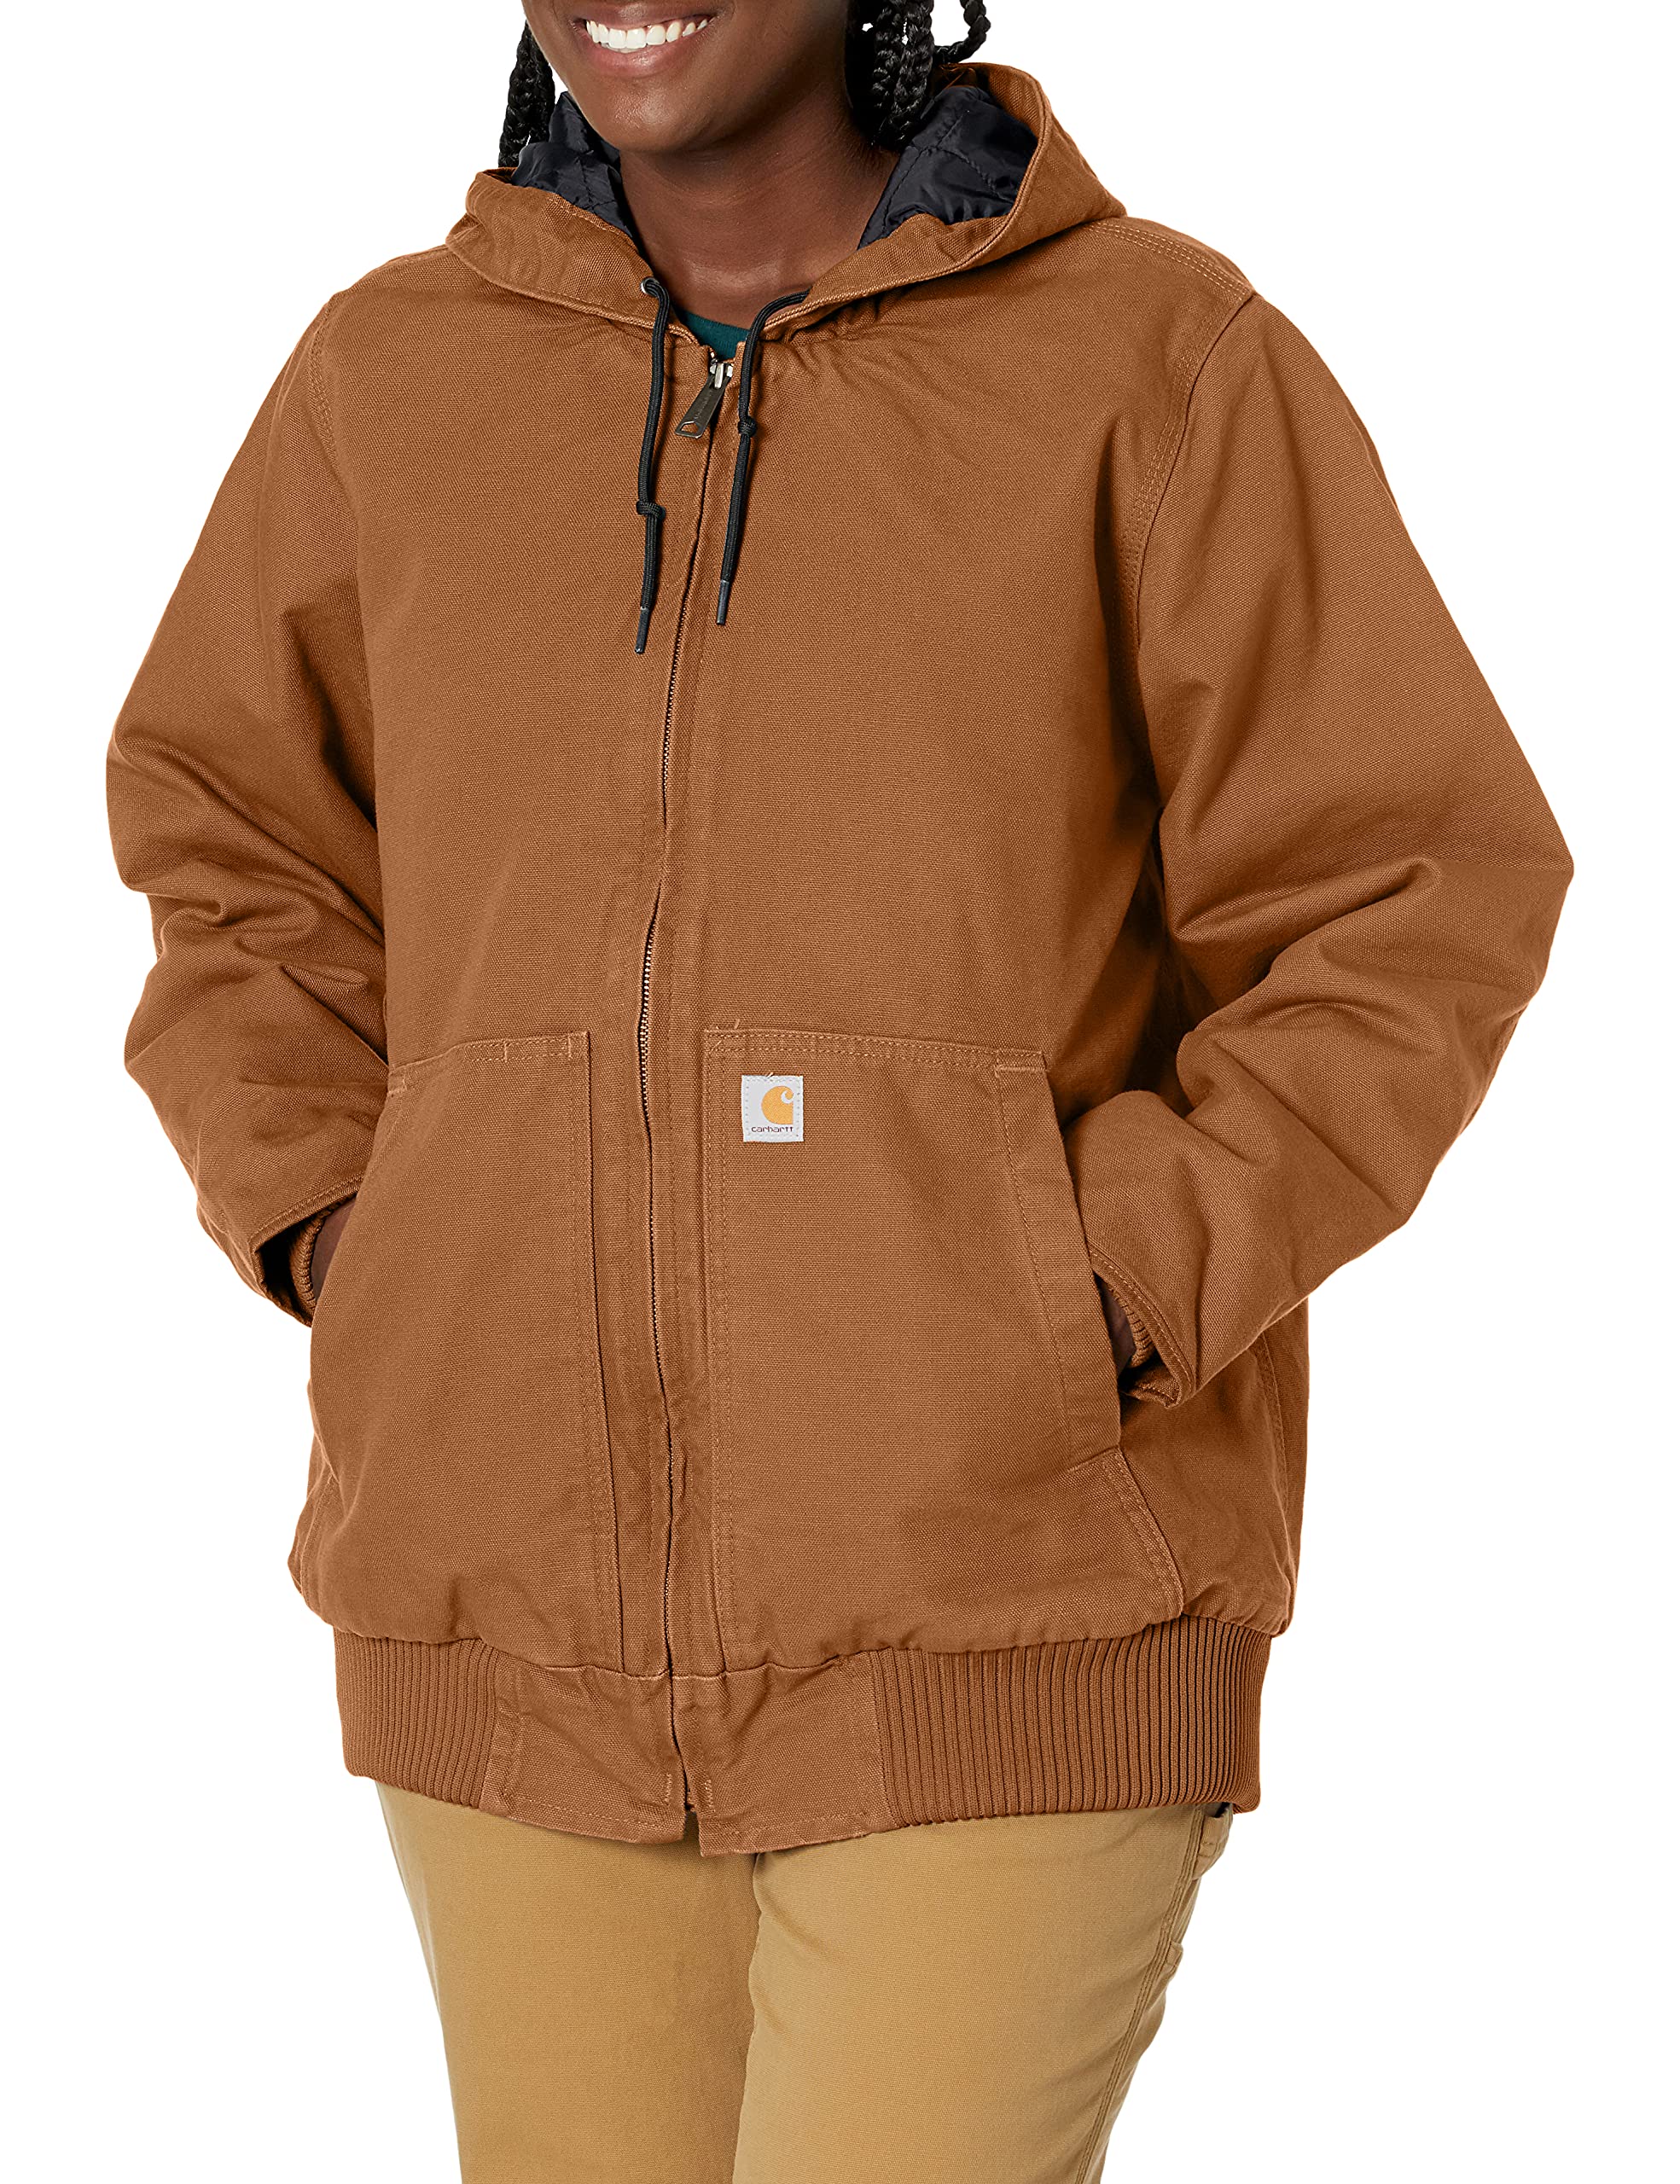 Carhartt Women's Loose Fit Washed Duck Insulated Active Jacket